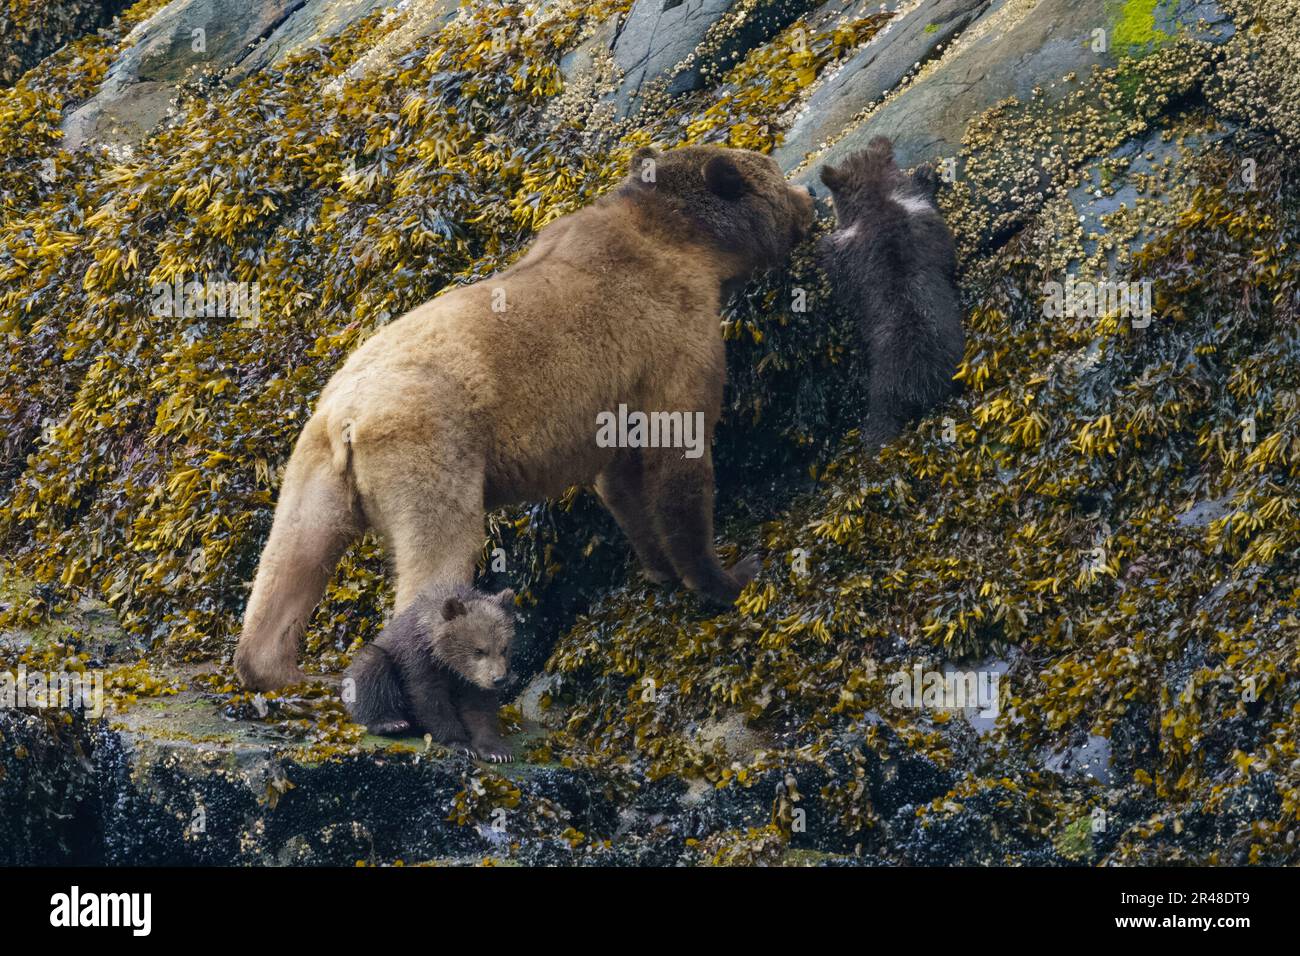 Grizzly bear mom with two about 3-4 month old cubs (coy) coming out of the forest in Knight Inlet, First Nations Territory, Traditional Territories of Stock Photo